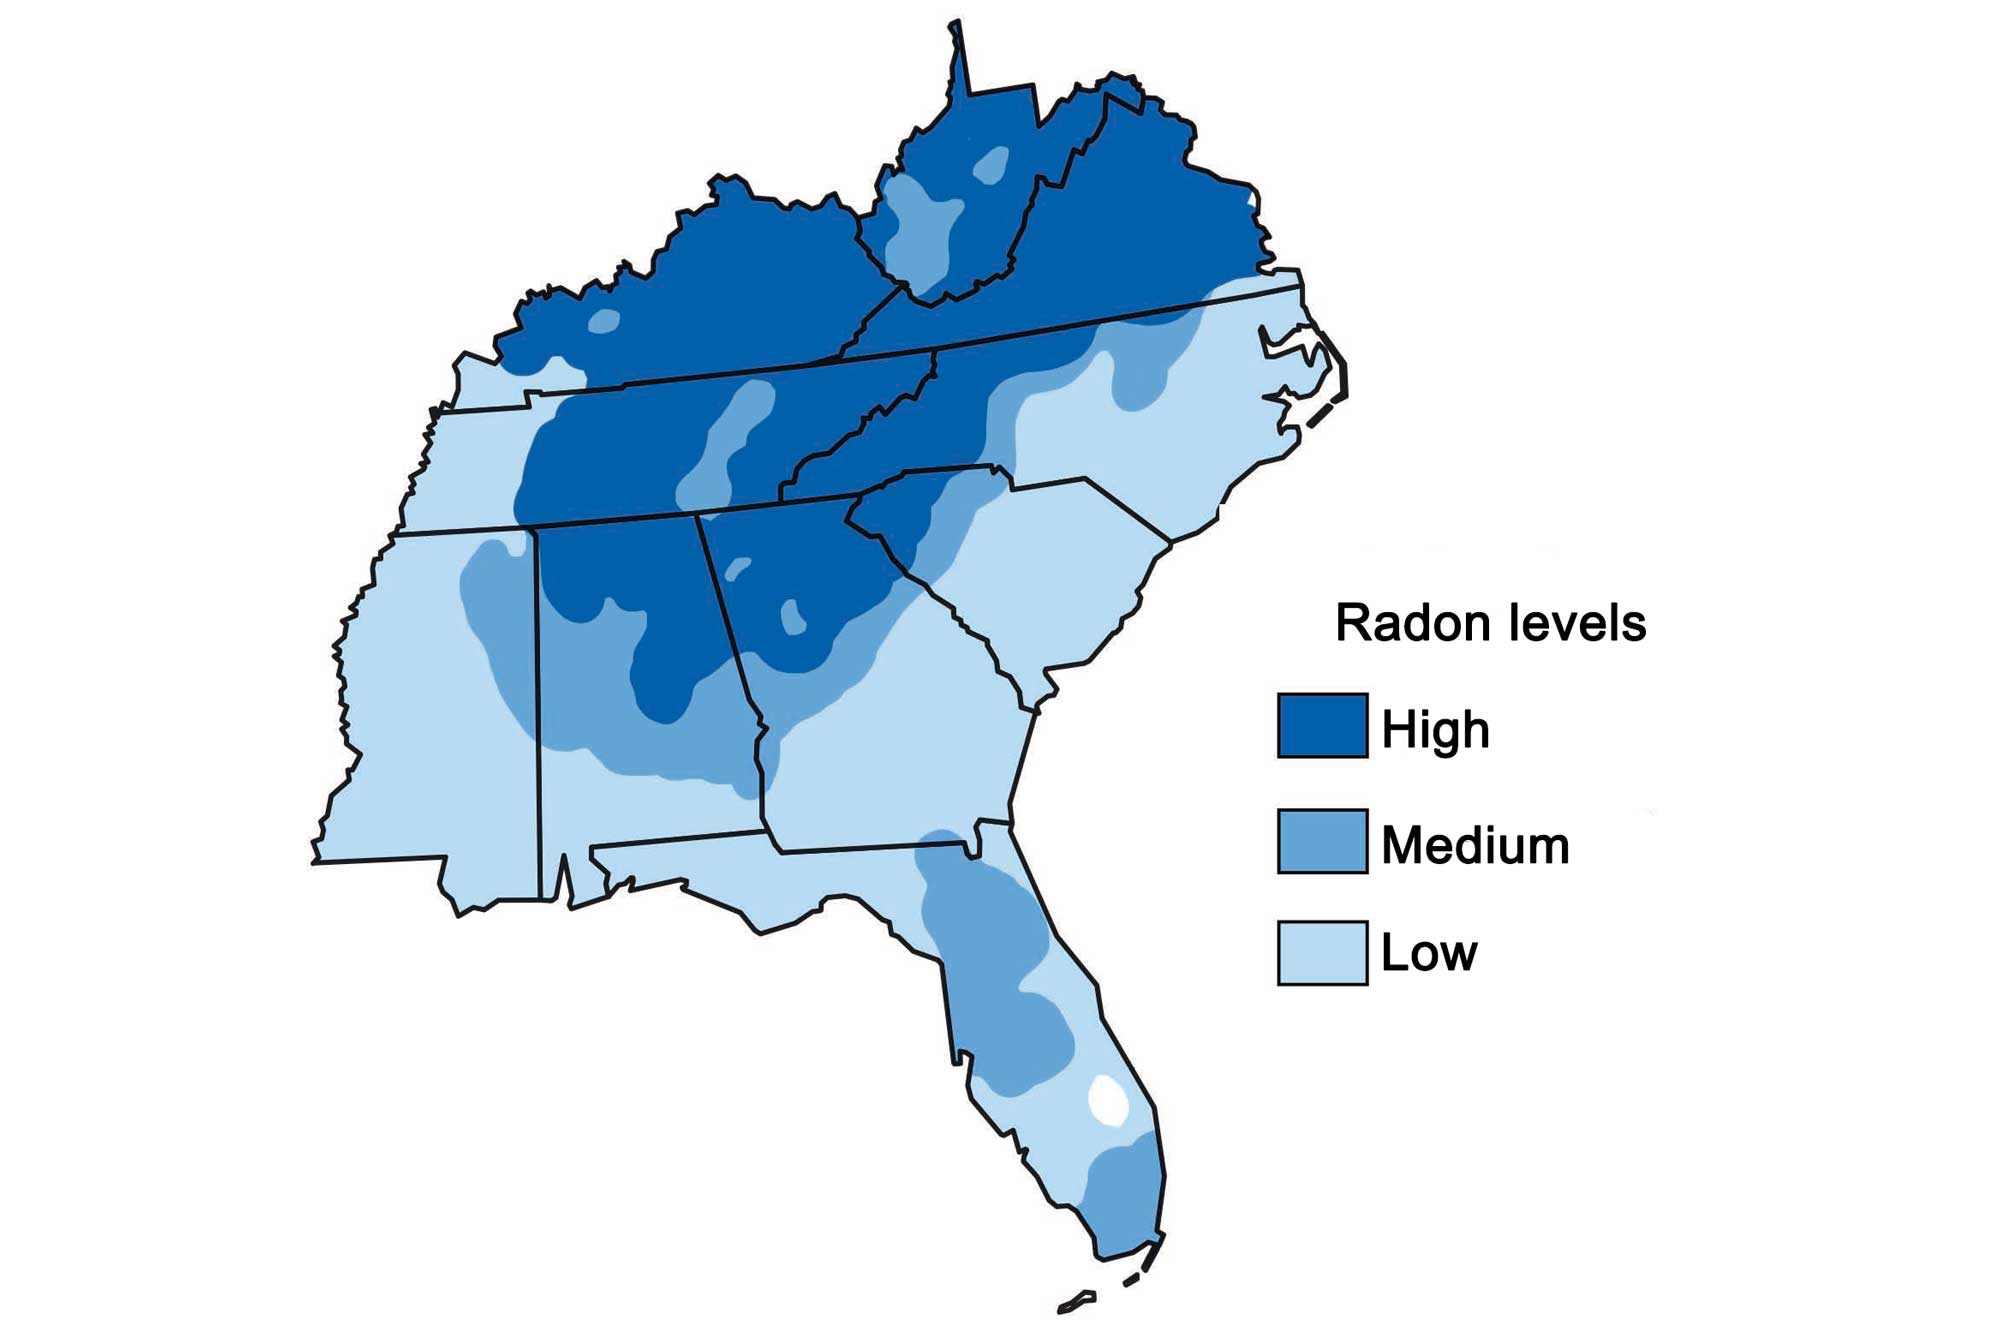 Colored map showing different levels of radon in the southeastern United States.